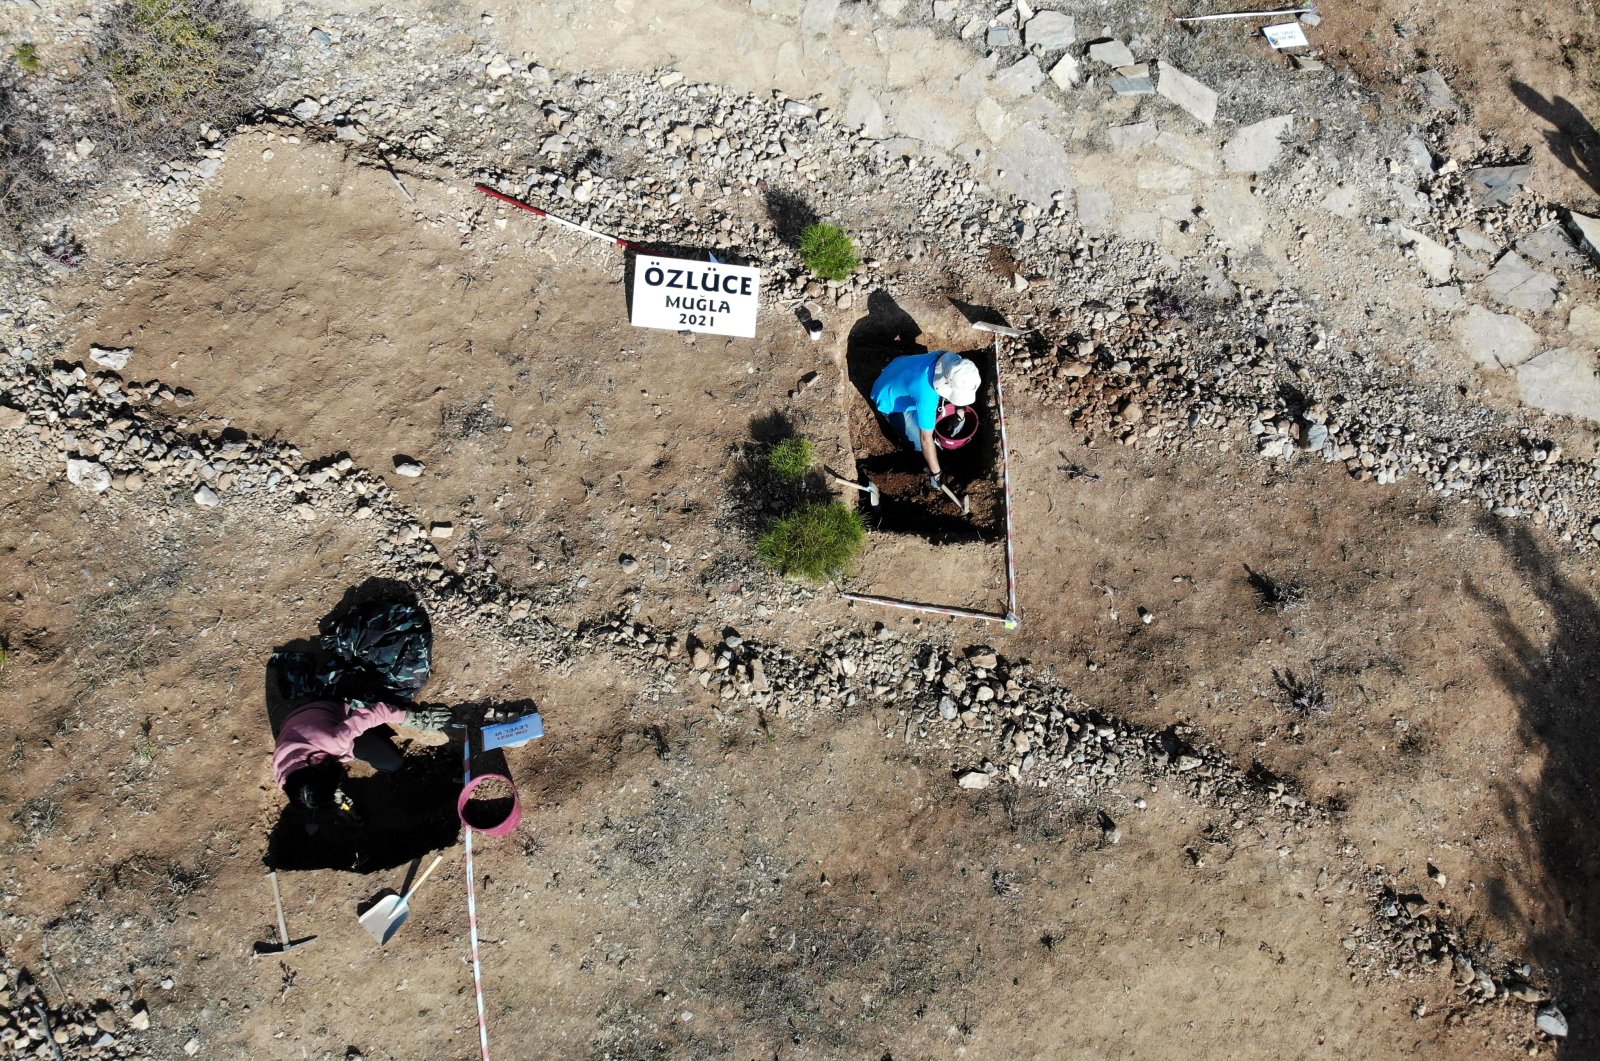 An aerial photo showing the excavation site near Kaklıca Tepe, in the Özlüce District of Muğla in Turkey. (Photo by AA)